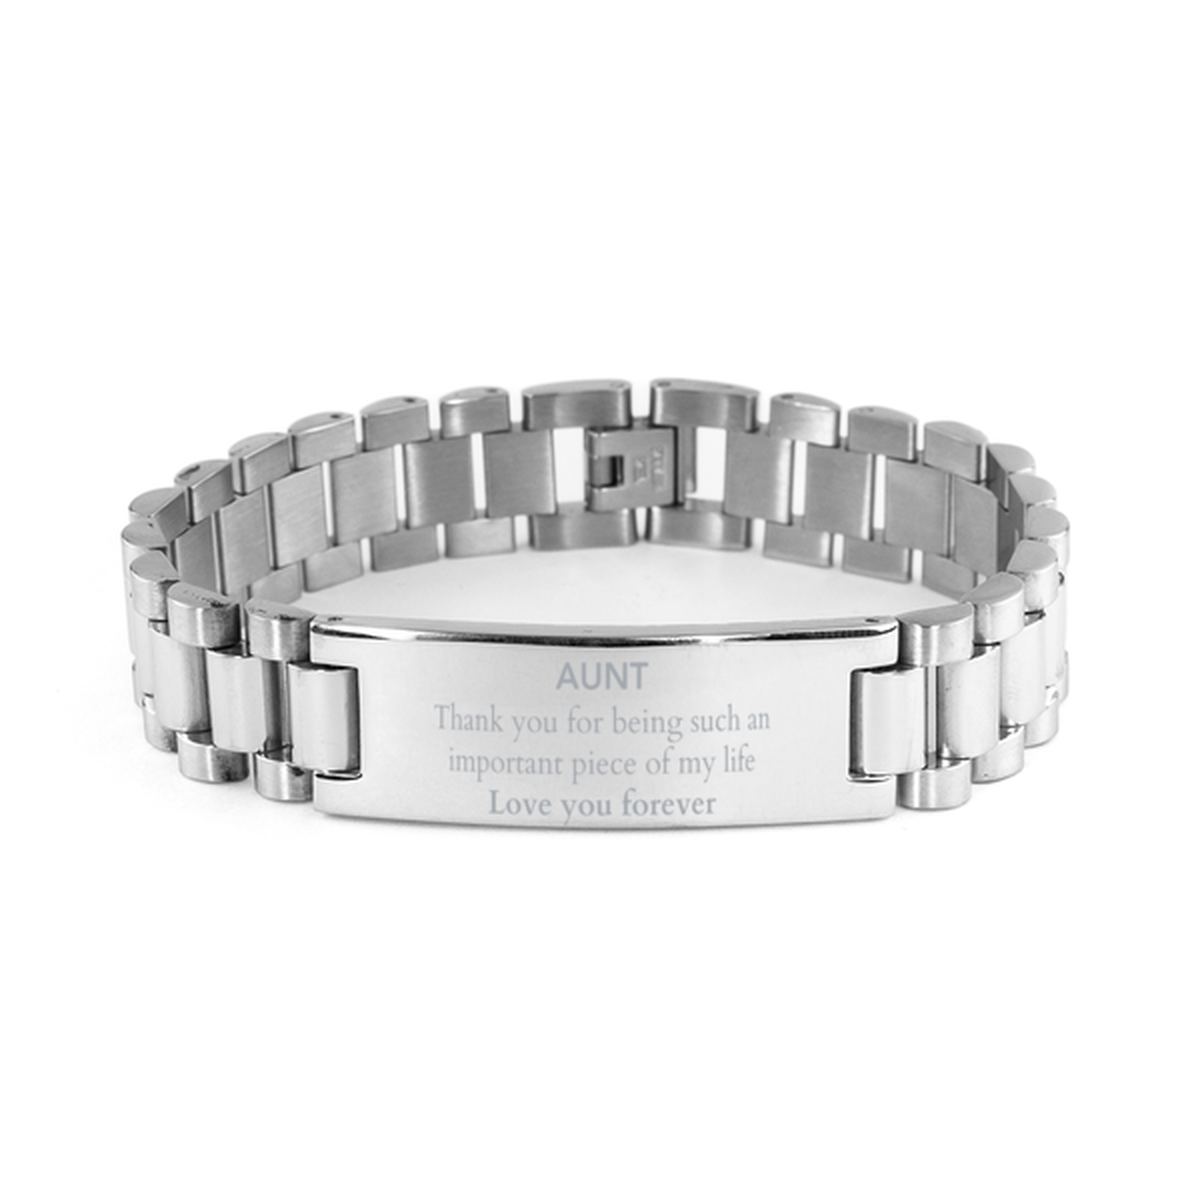 Appropriate Aunt Ladder Stainless Steel Bracelet Epic Birthday Gifts for Aunt Thank you for being such an important piece of my life Aunt Christmas Mothers Fathers Day